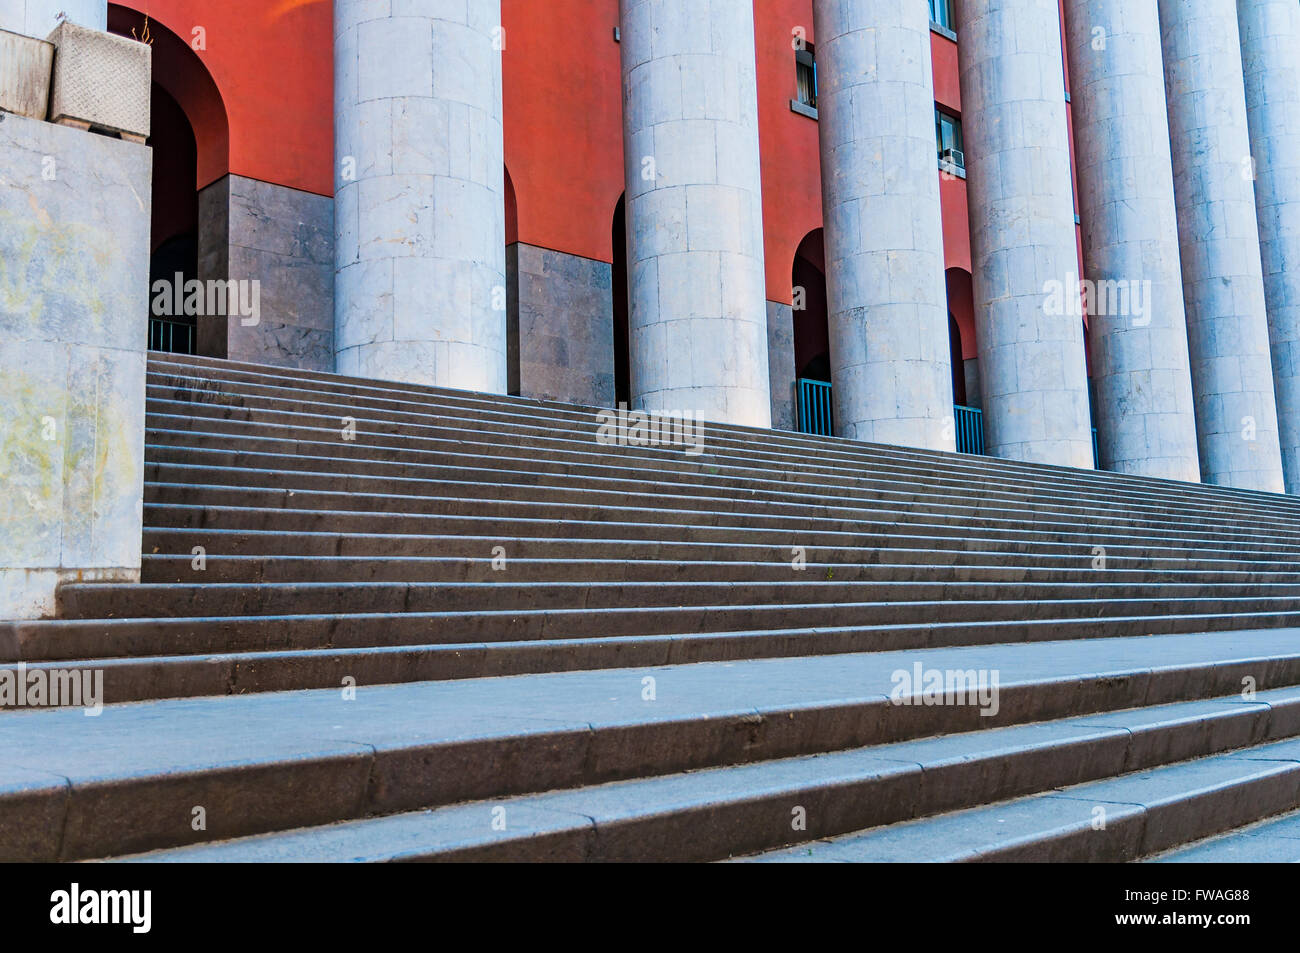 The Post Office building. Fascist Architecture. Palermo, Sicily, Italy. Stock Photo